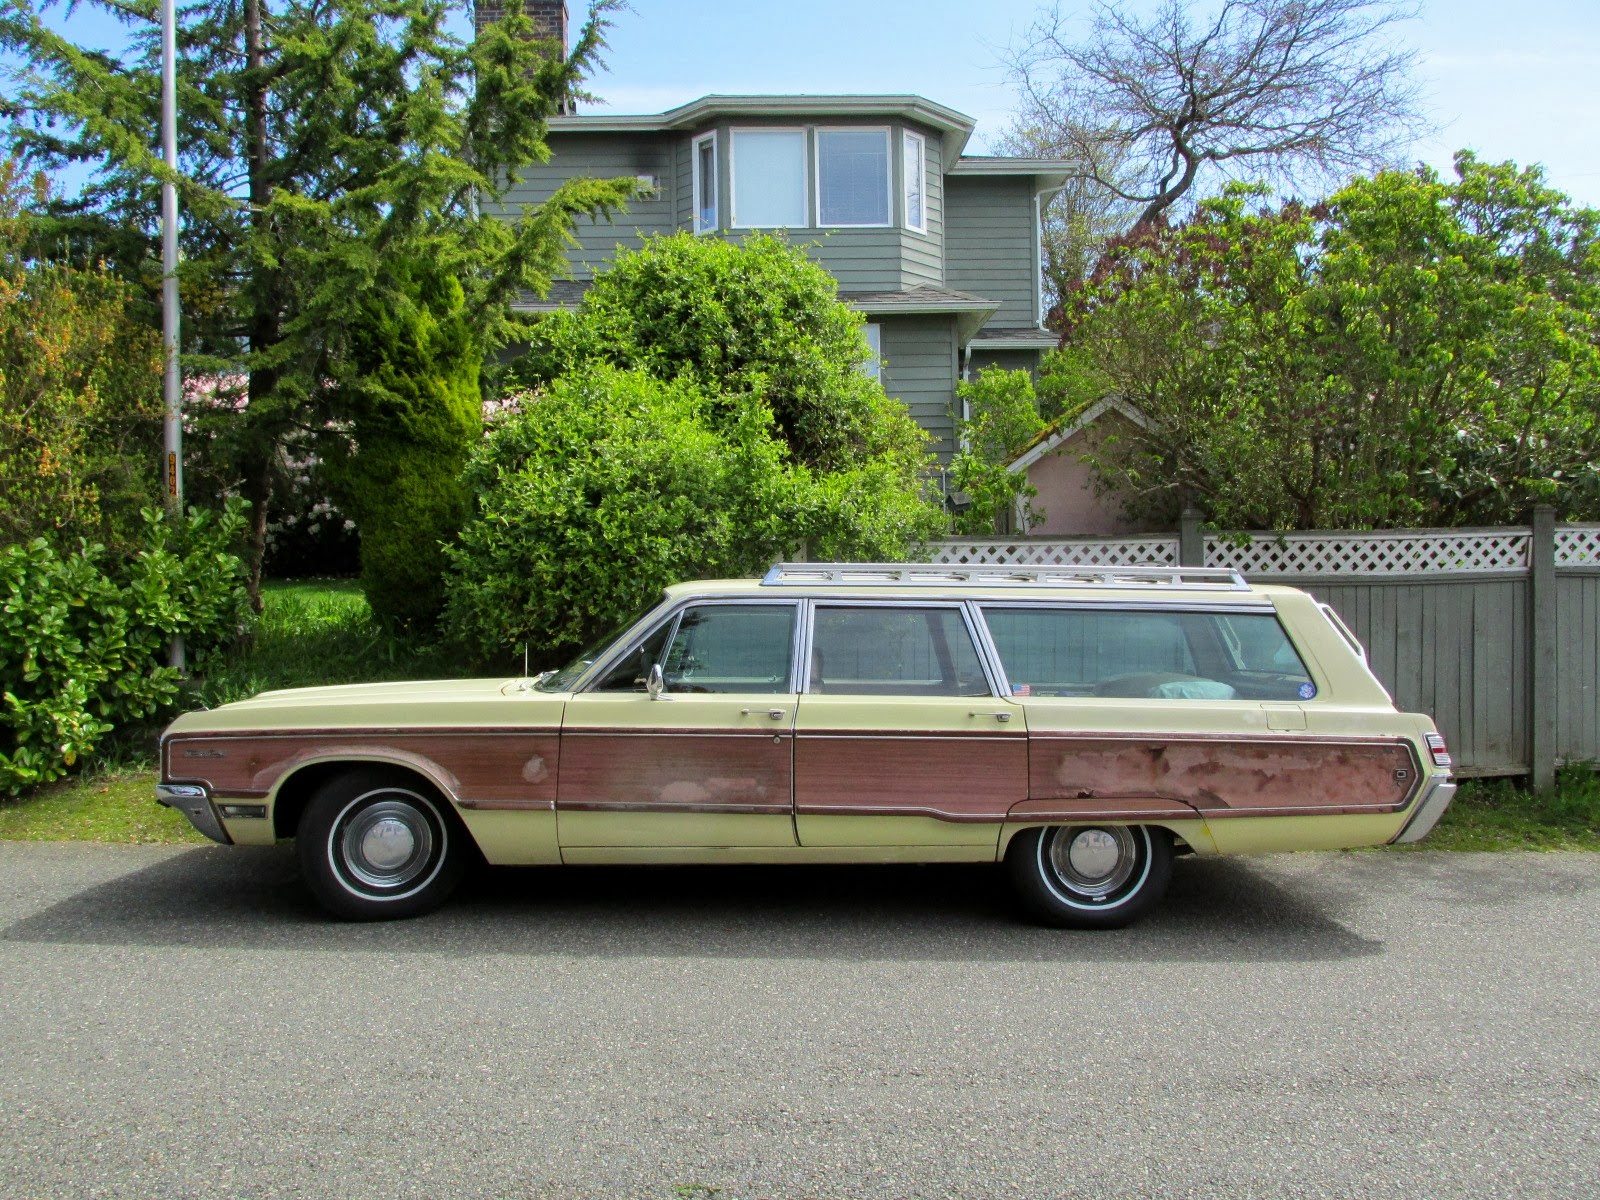 1968 Chrysler country town wagon